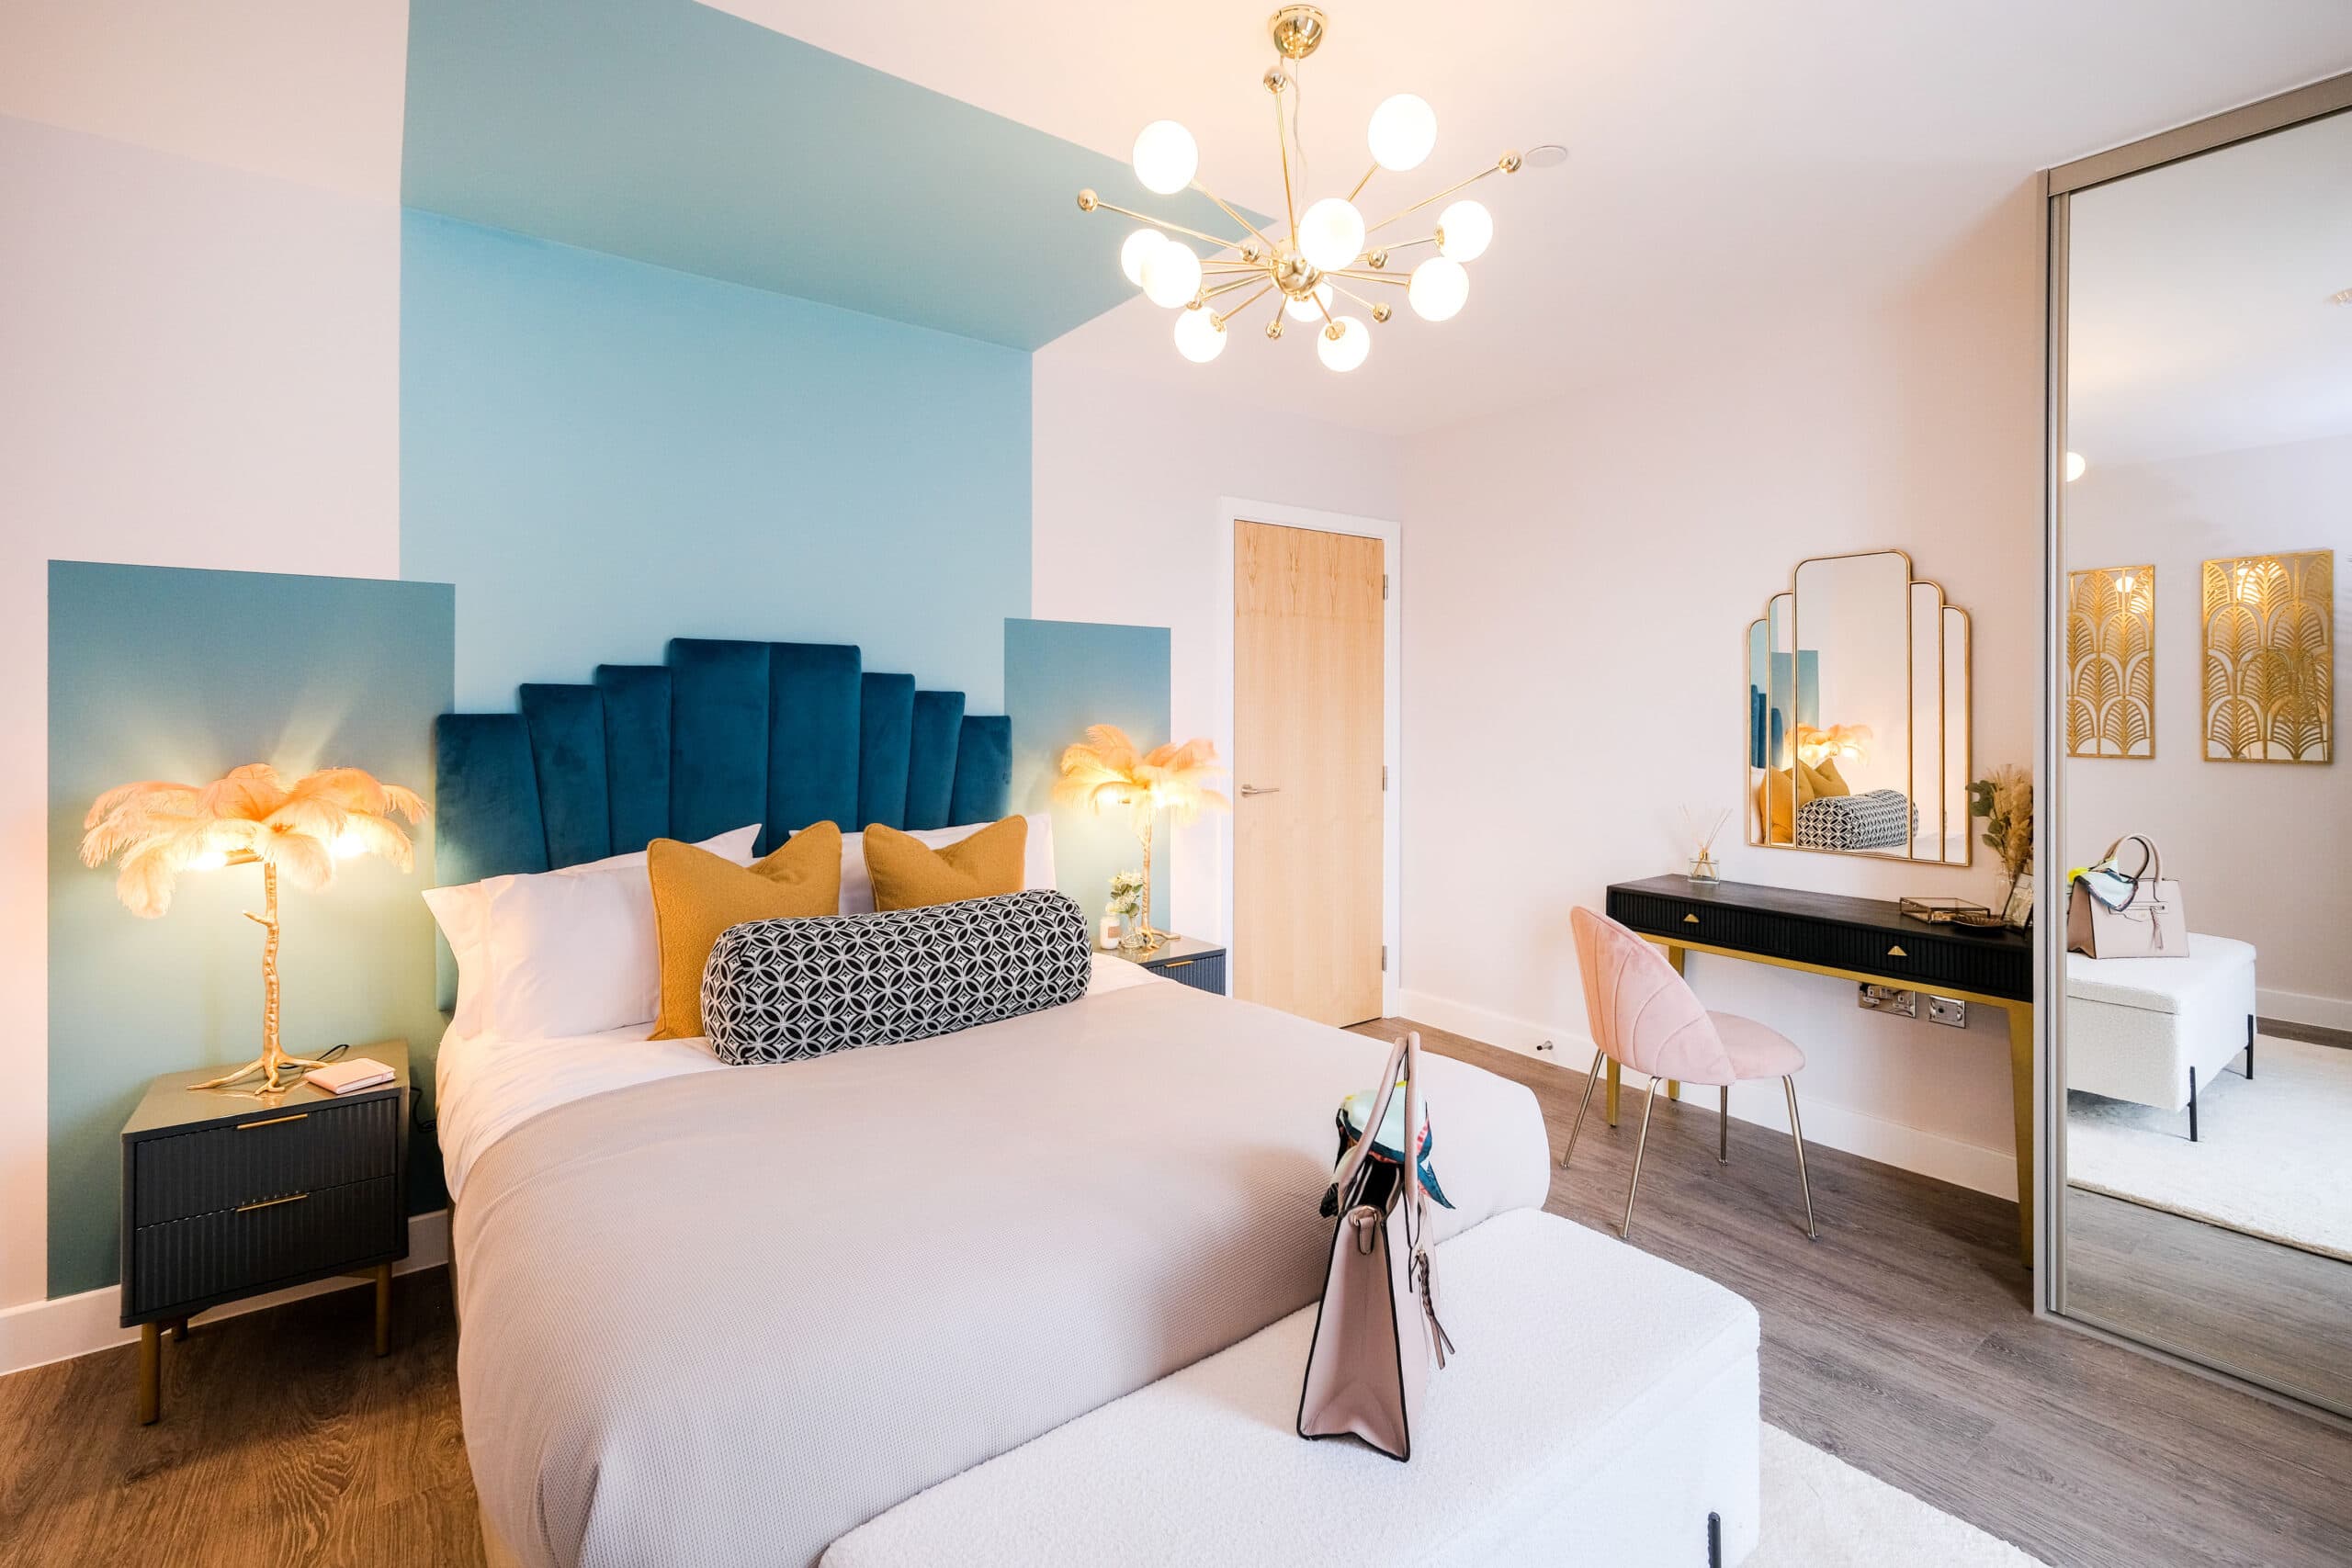 Image of the bedroom of The Bowery development from Latimer by Clarion Housing Group - available to purchase through Shared Ownership on Share to Buy!